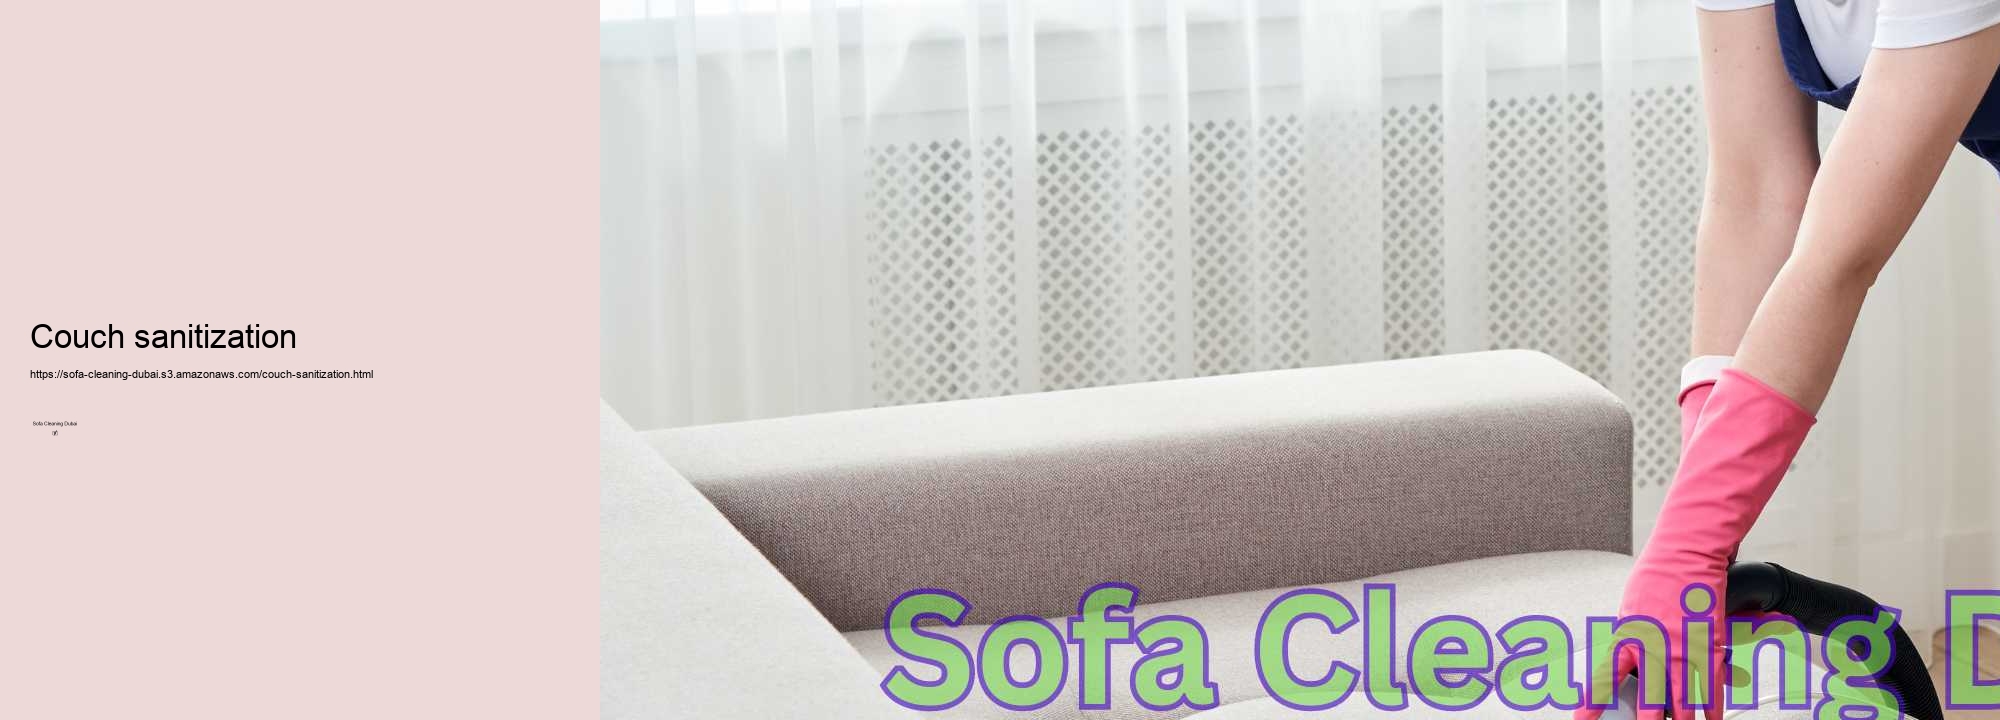 Couch sanitization